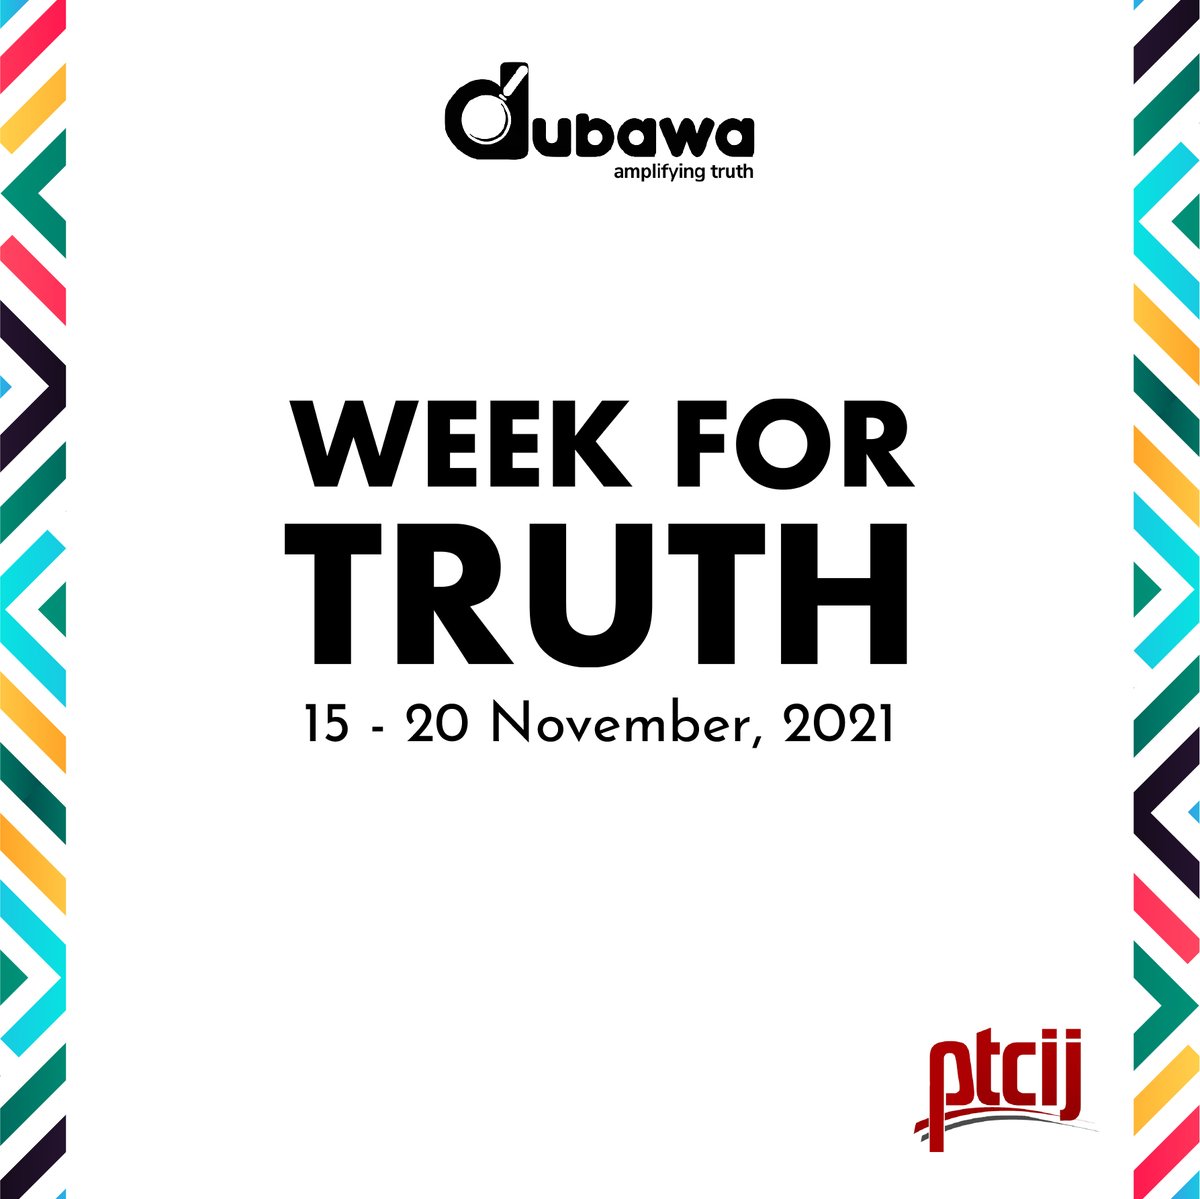 The Dubawa West Africa Week For Truth starts this week! Follow @dubawaNG @dubawaGH @DubawaSL and @DubawaGM on Twitter to learn about fact-checking, get tips on how to verify news online and win fantastic prizes! #DubawaChecks